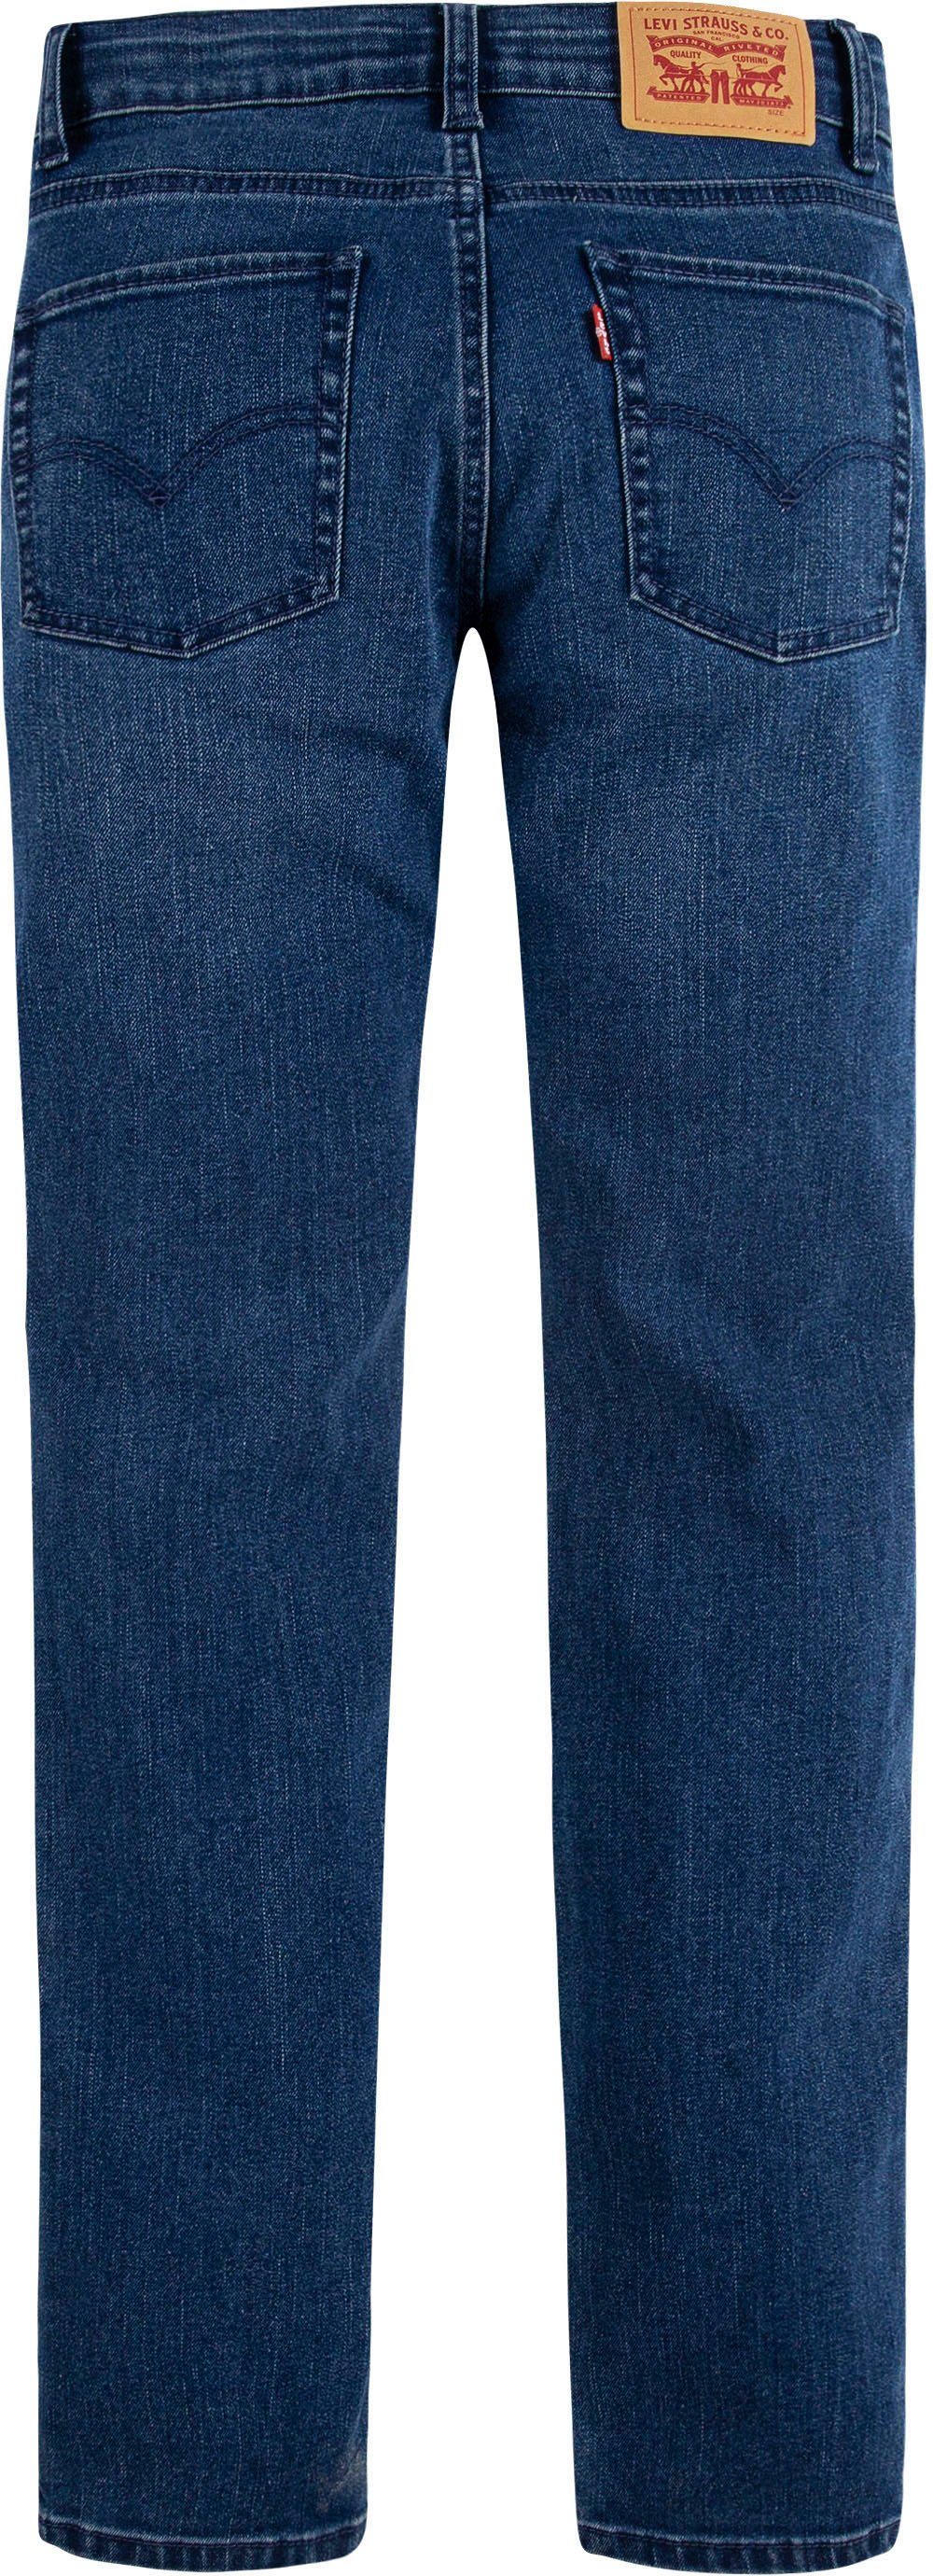 Levi's® Kids Skinny-fit-Jeans used blue SKINNY for heavy 510 FIT BOYS JEANS